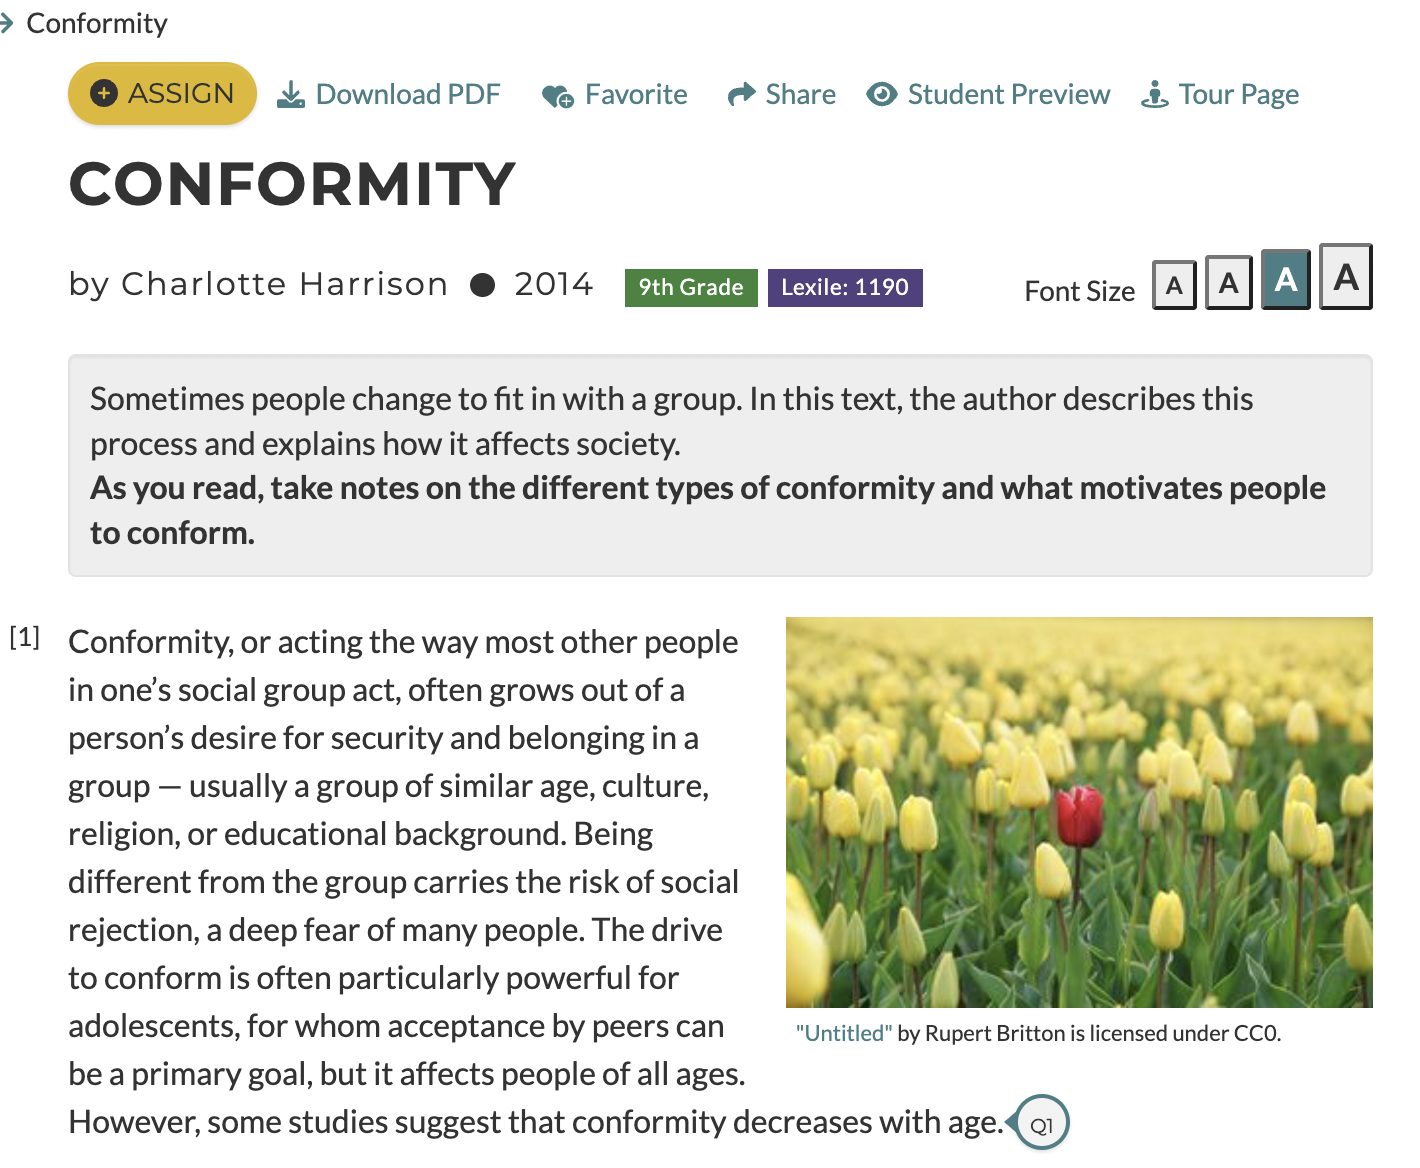 A screenshot of the passage "Conformity" by Charlotte Harrison